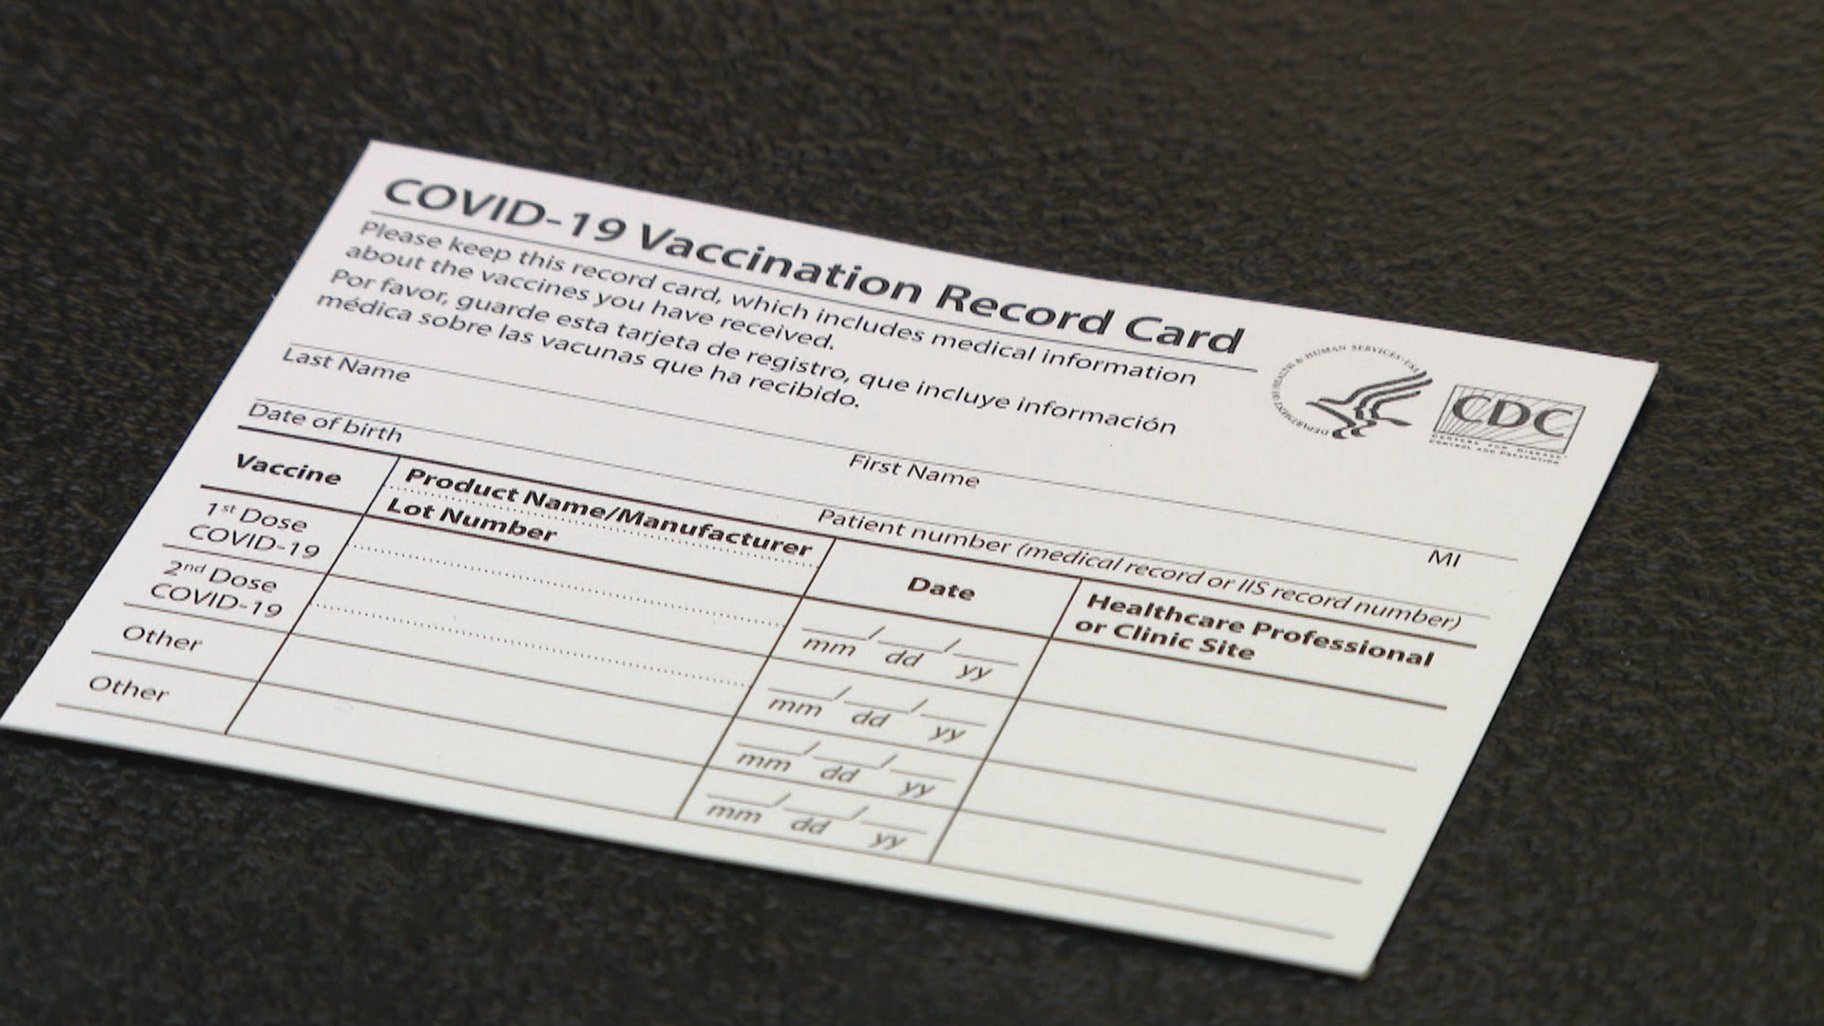  Customs Officials Seize More Forged COVID-19 Vaccination Cards at O’Hare 